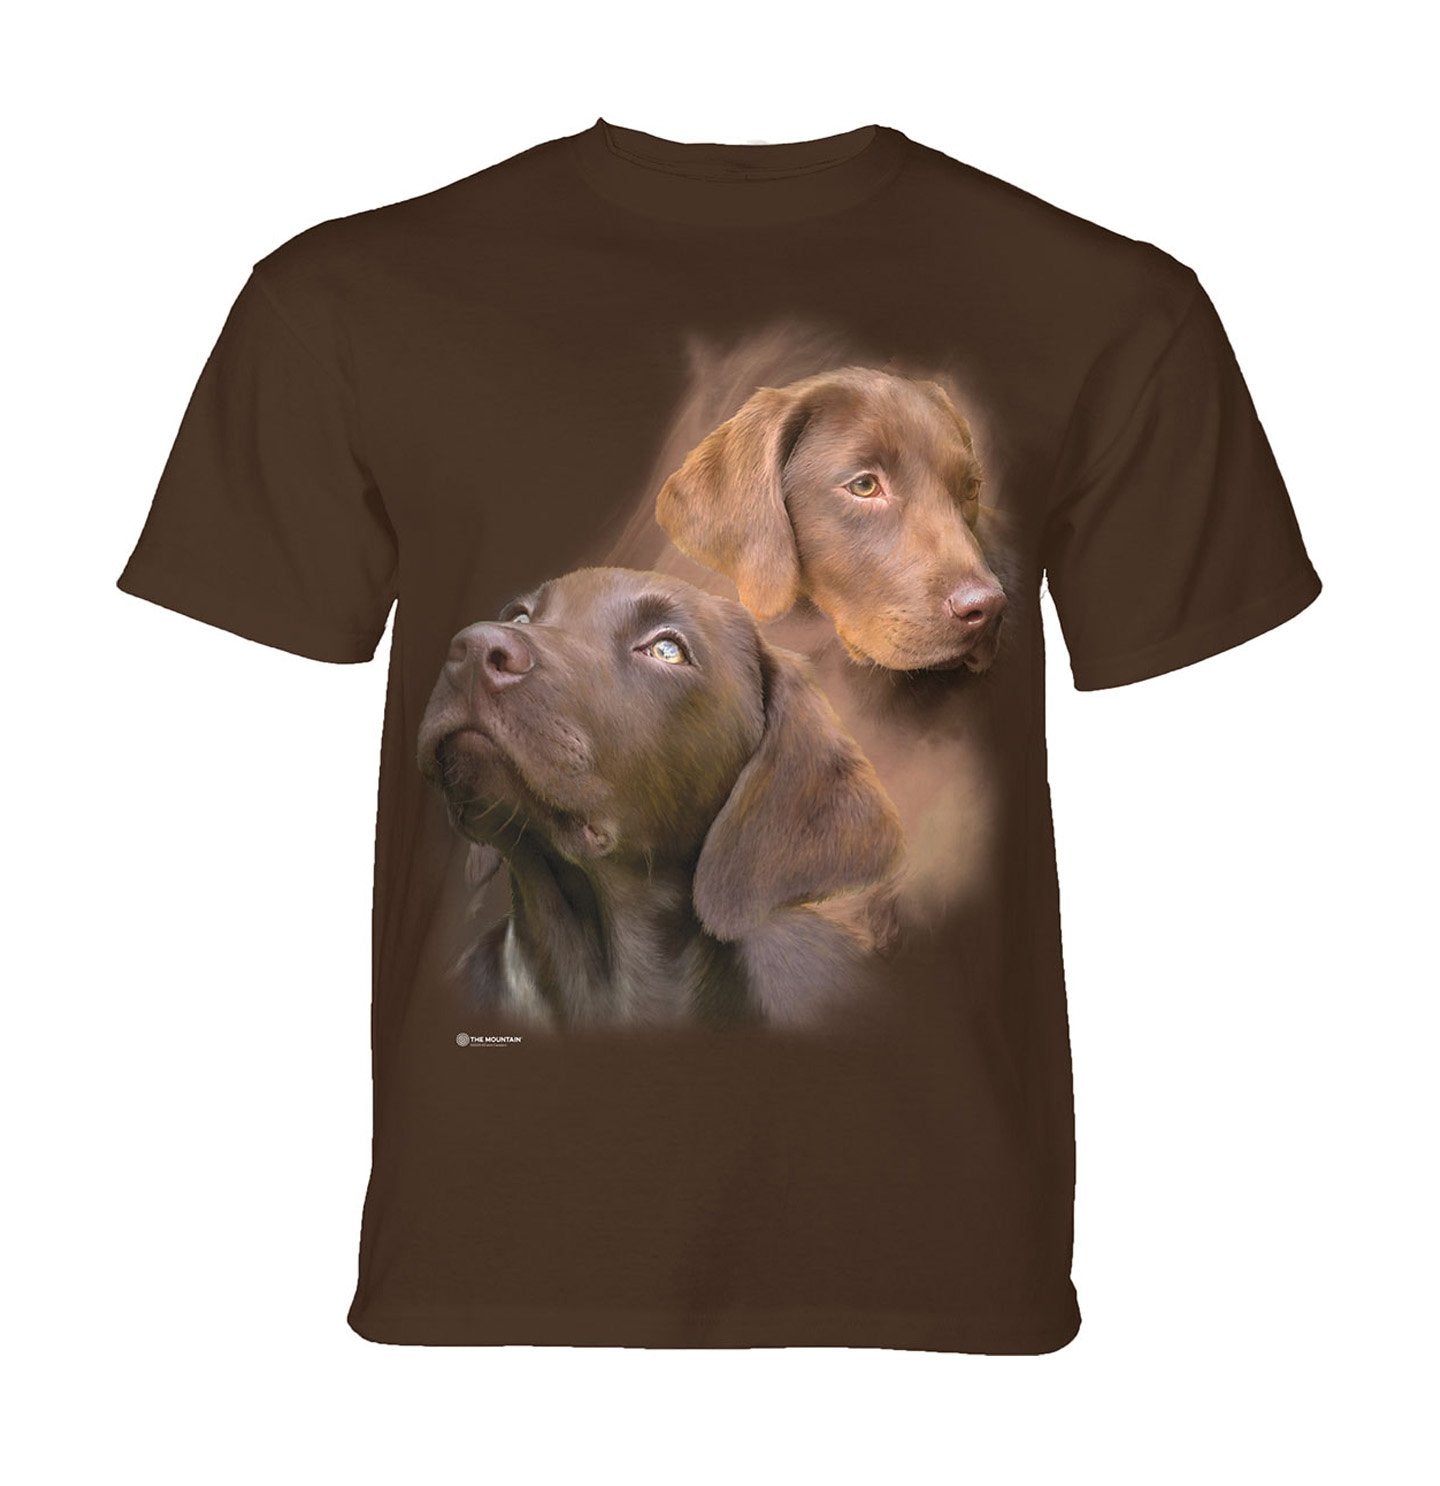 The Mountain - Chocolate Labs - Kids' Unisex T-Shirt